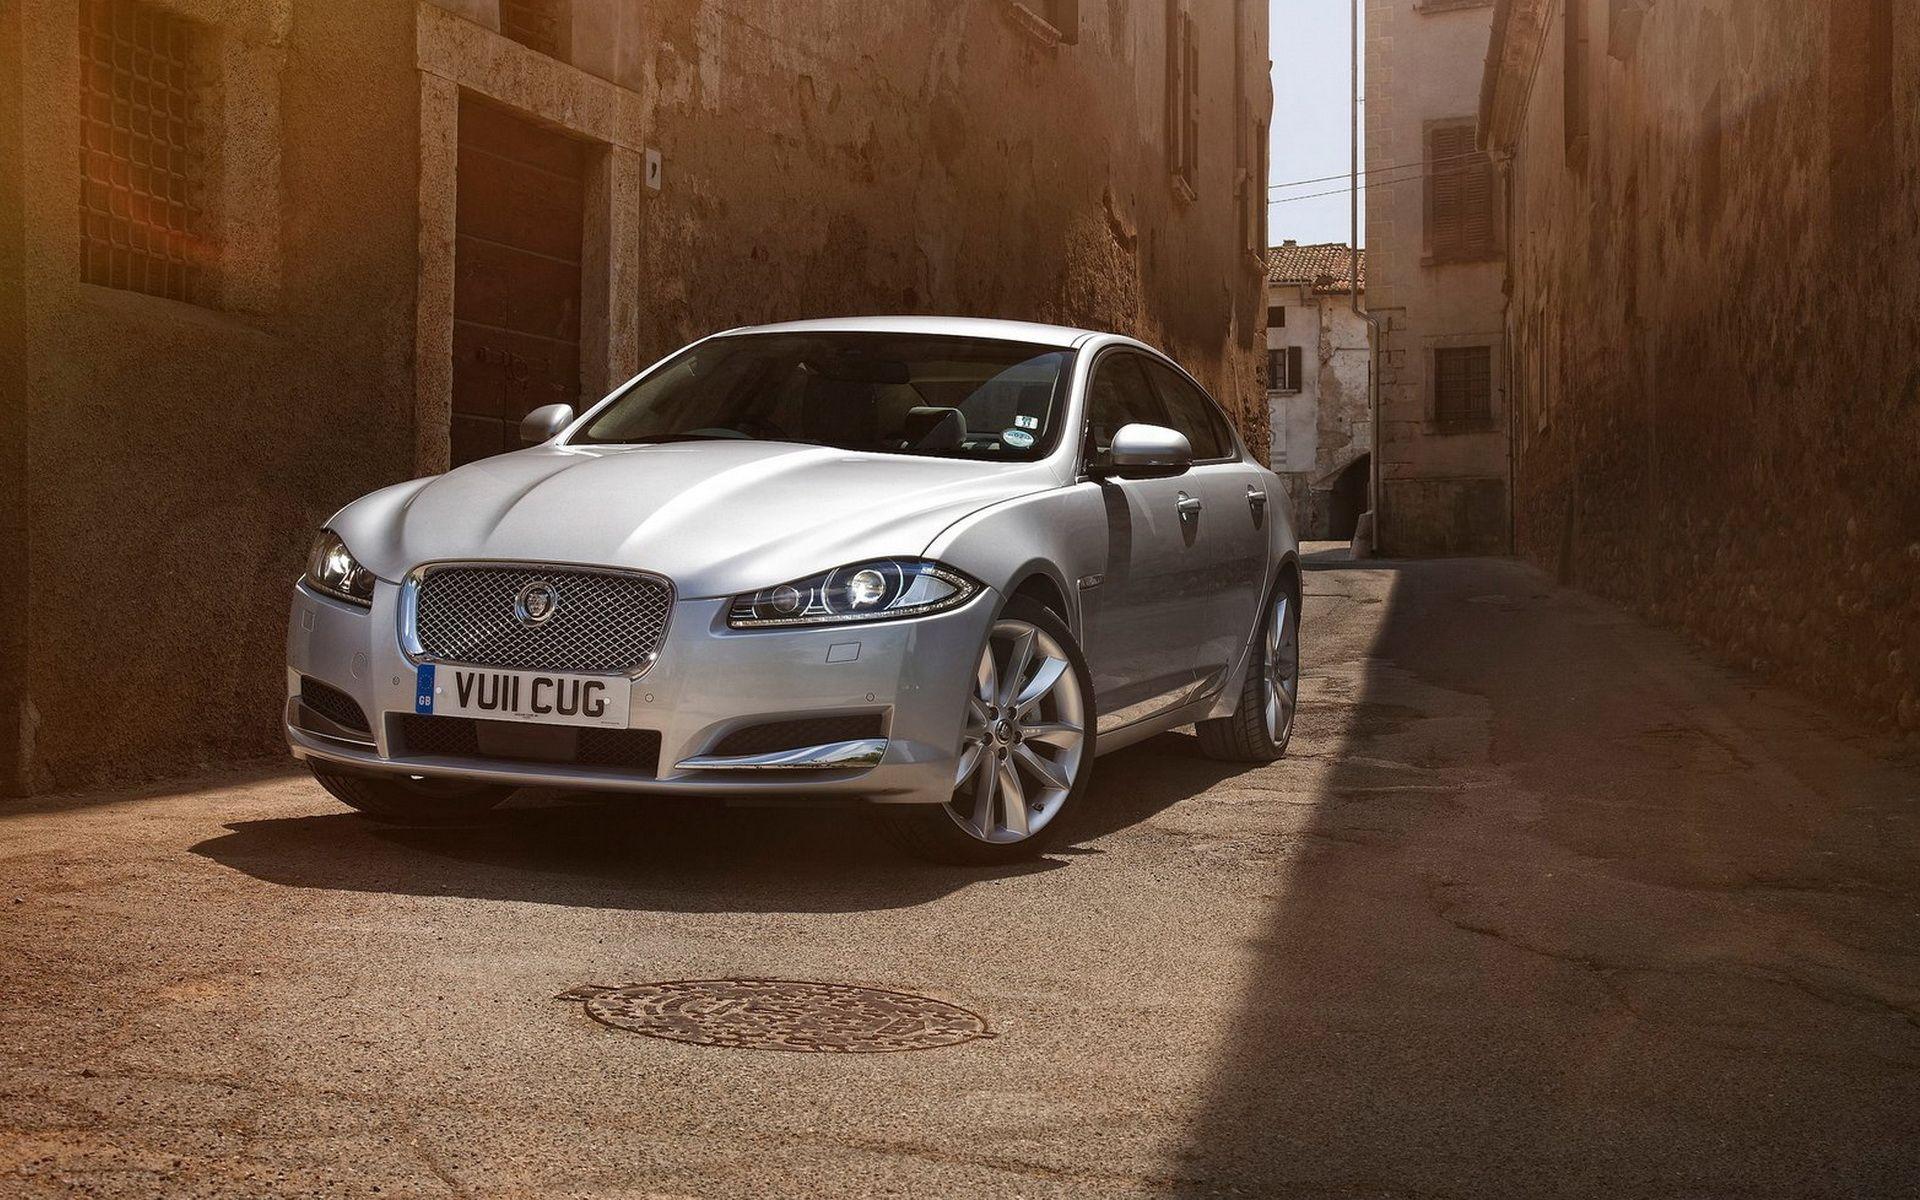 Jaguar XF Wallpaper And Image, Picture, Photo